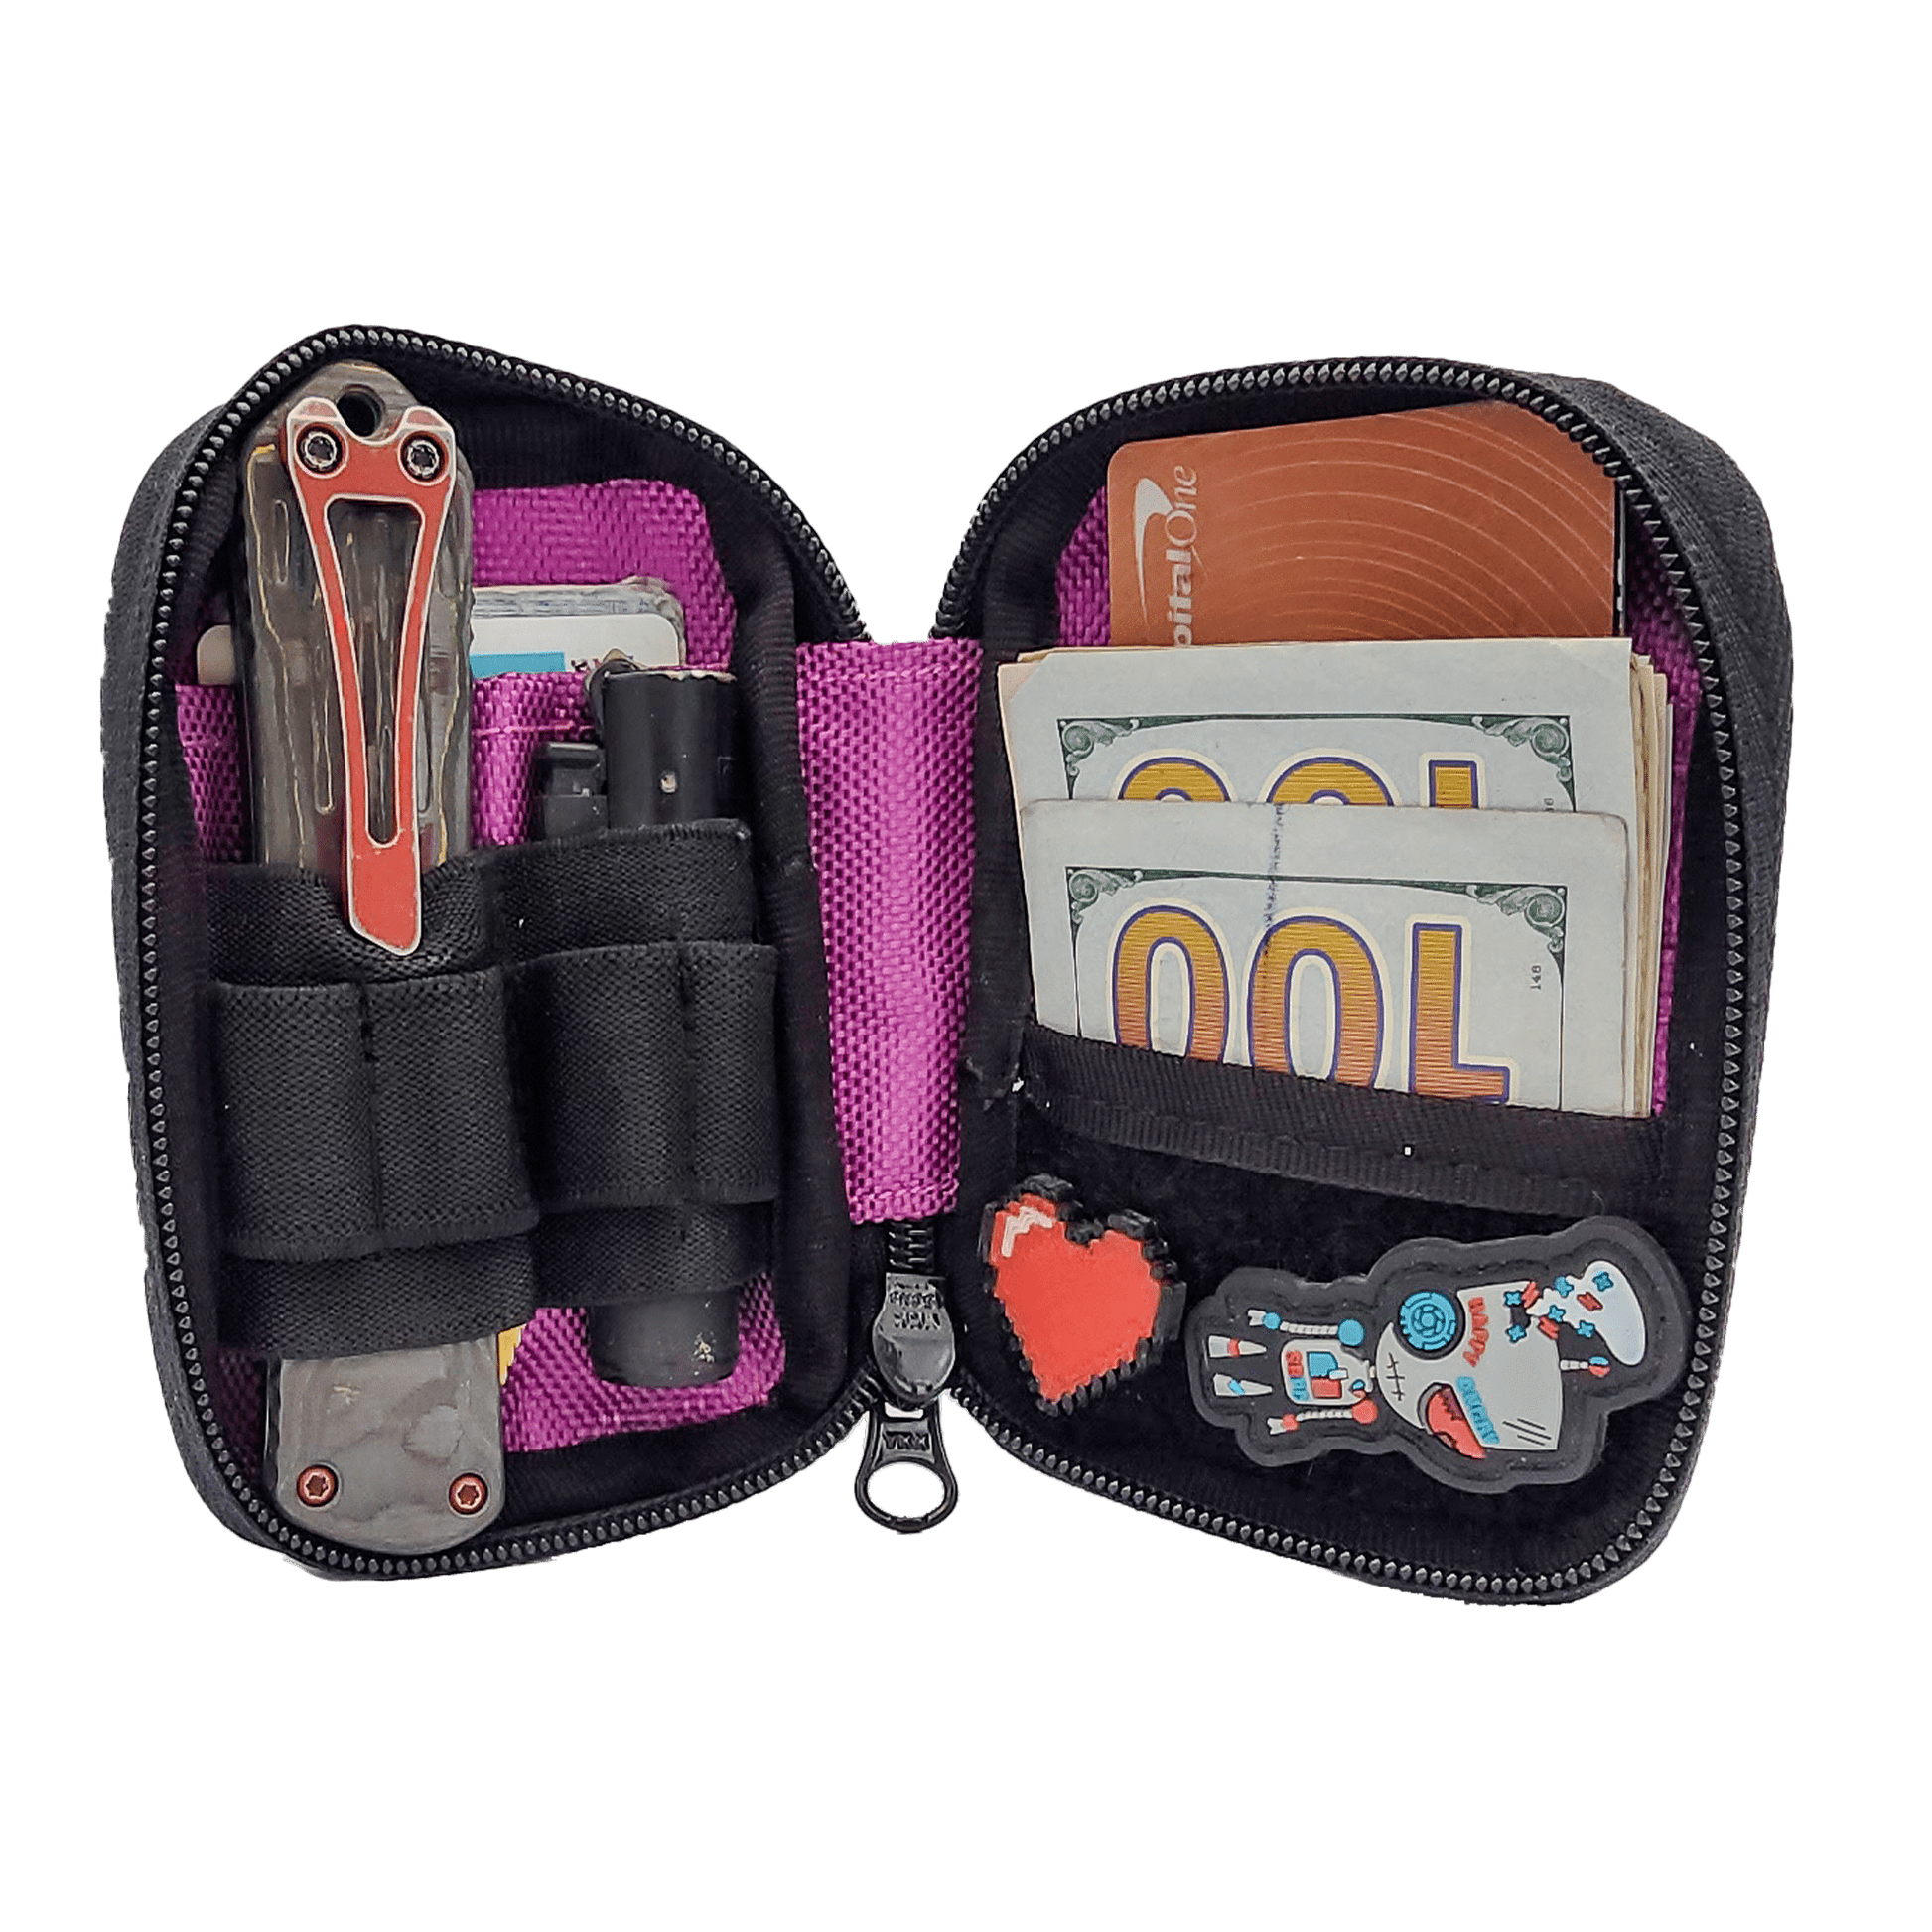 Open purple Micro Pouch with organized contents, including a knife, lighter, cash, and patches.